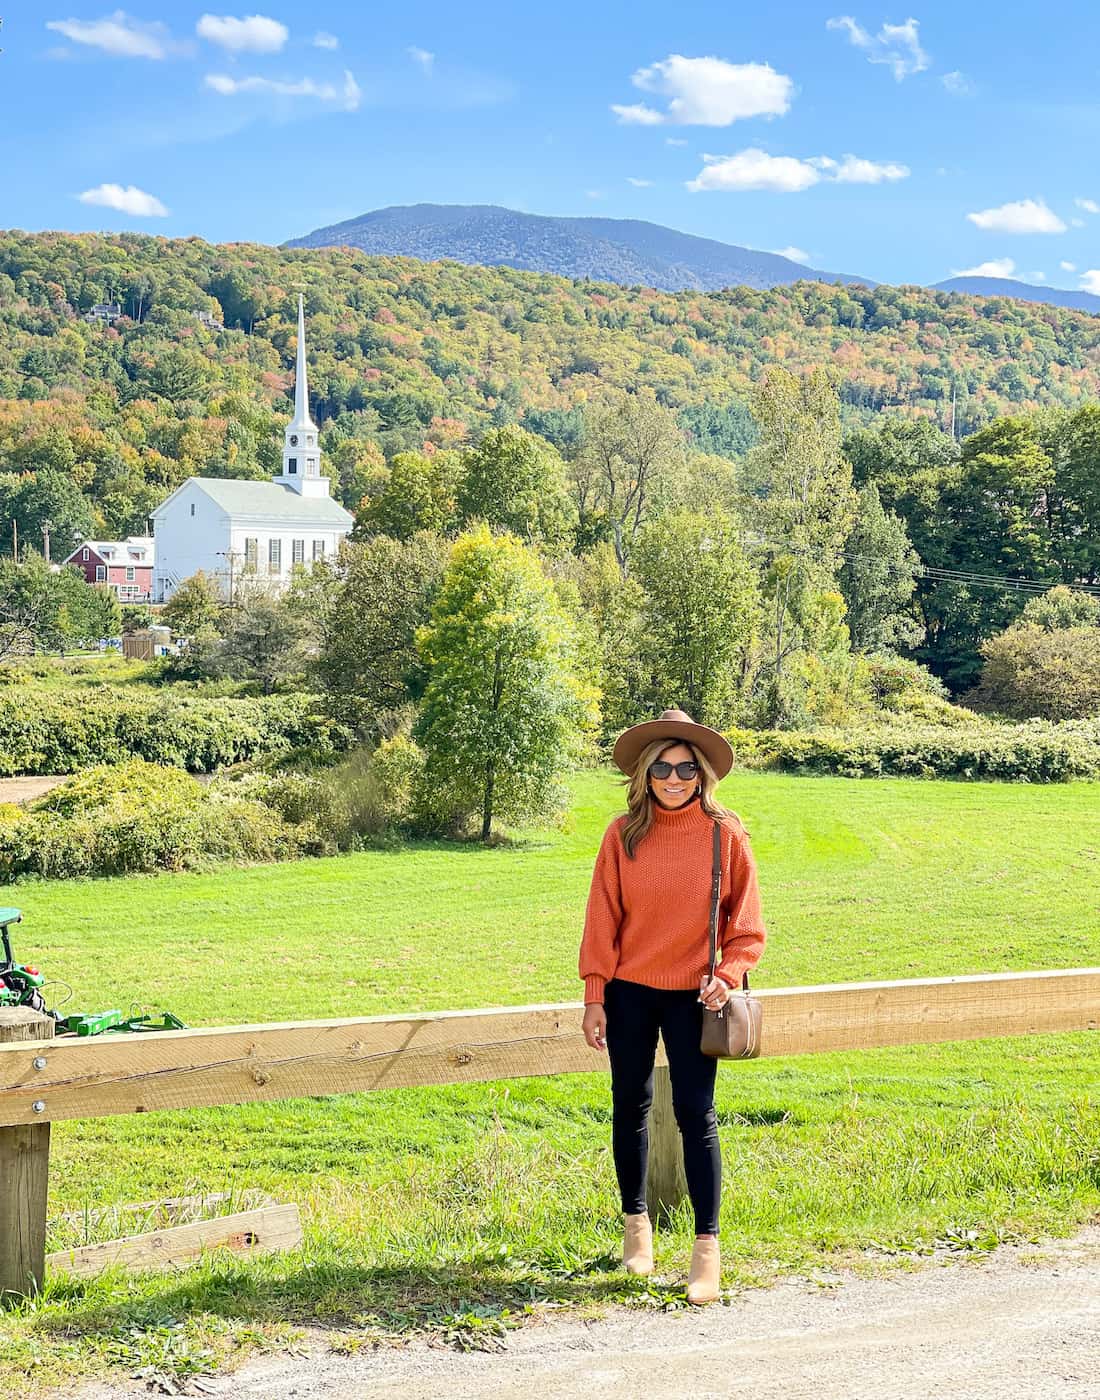 Fall Hiking Outfit from Stowe Vermont #hikingoutfit #stowe #womenwhohi, stowe vermont